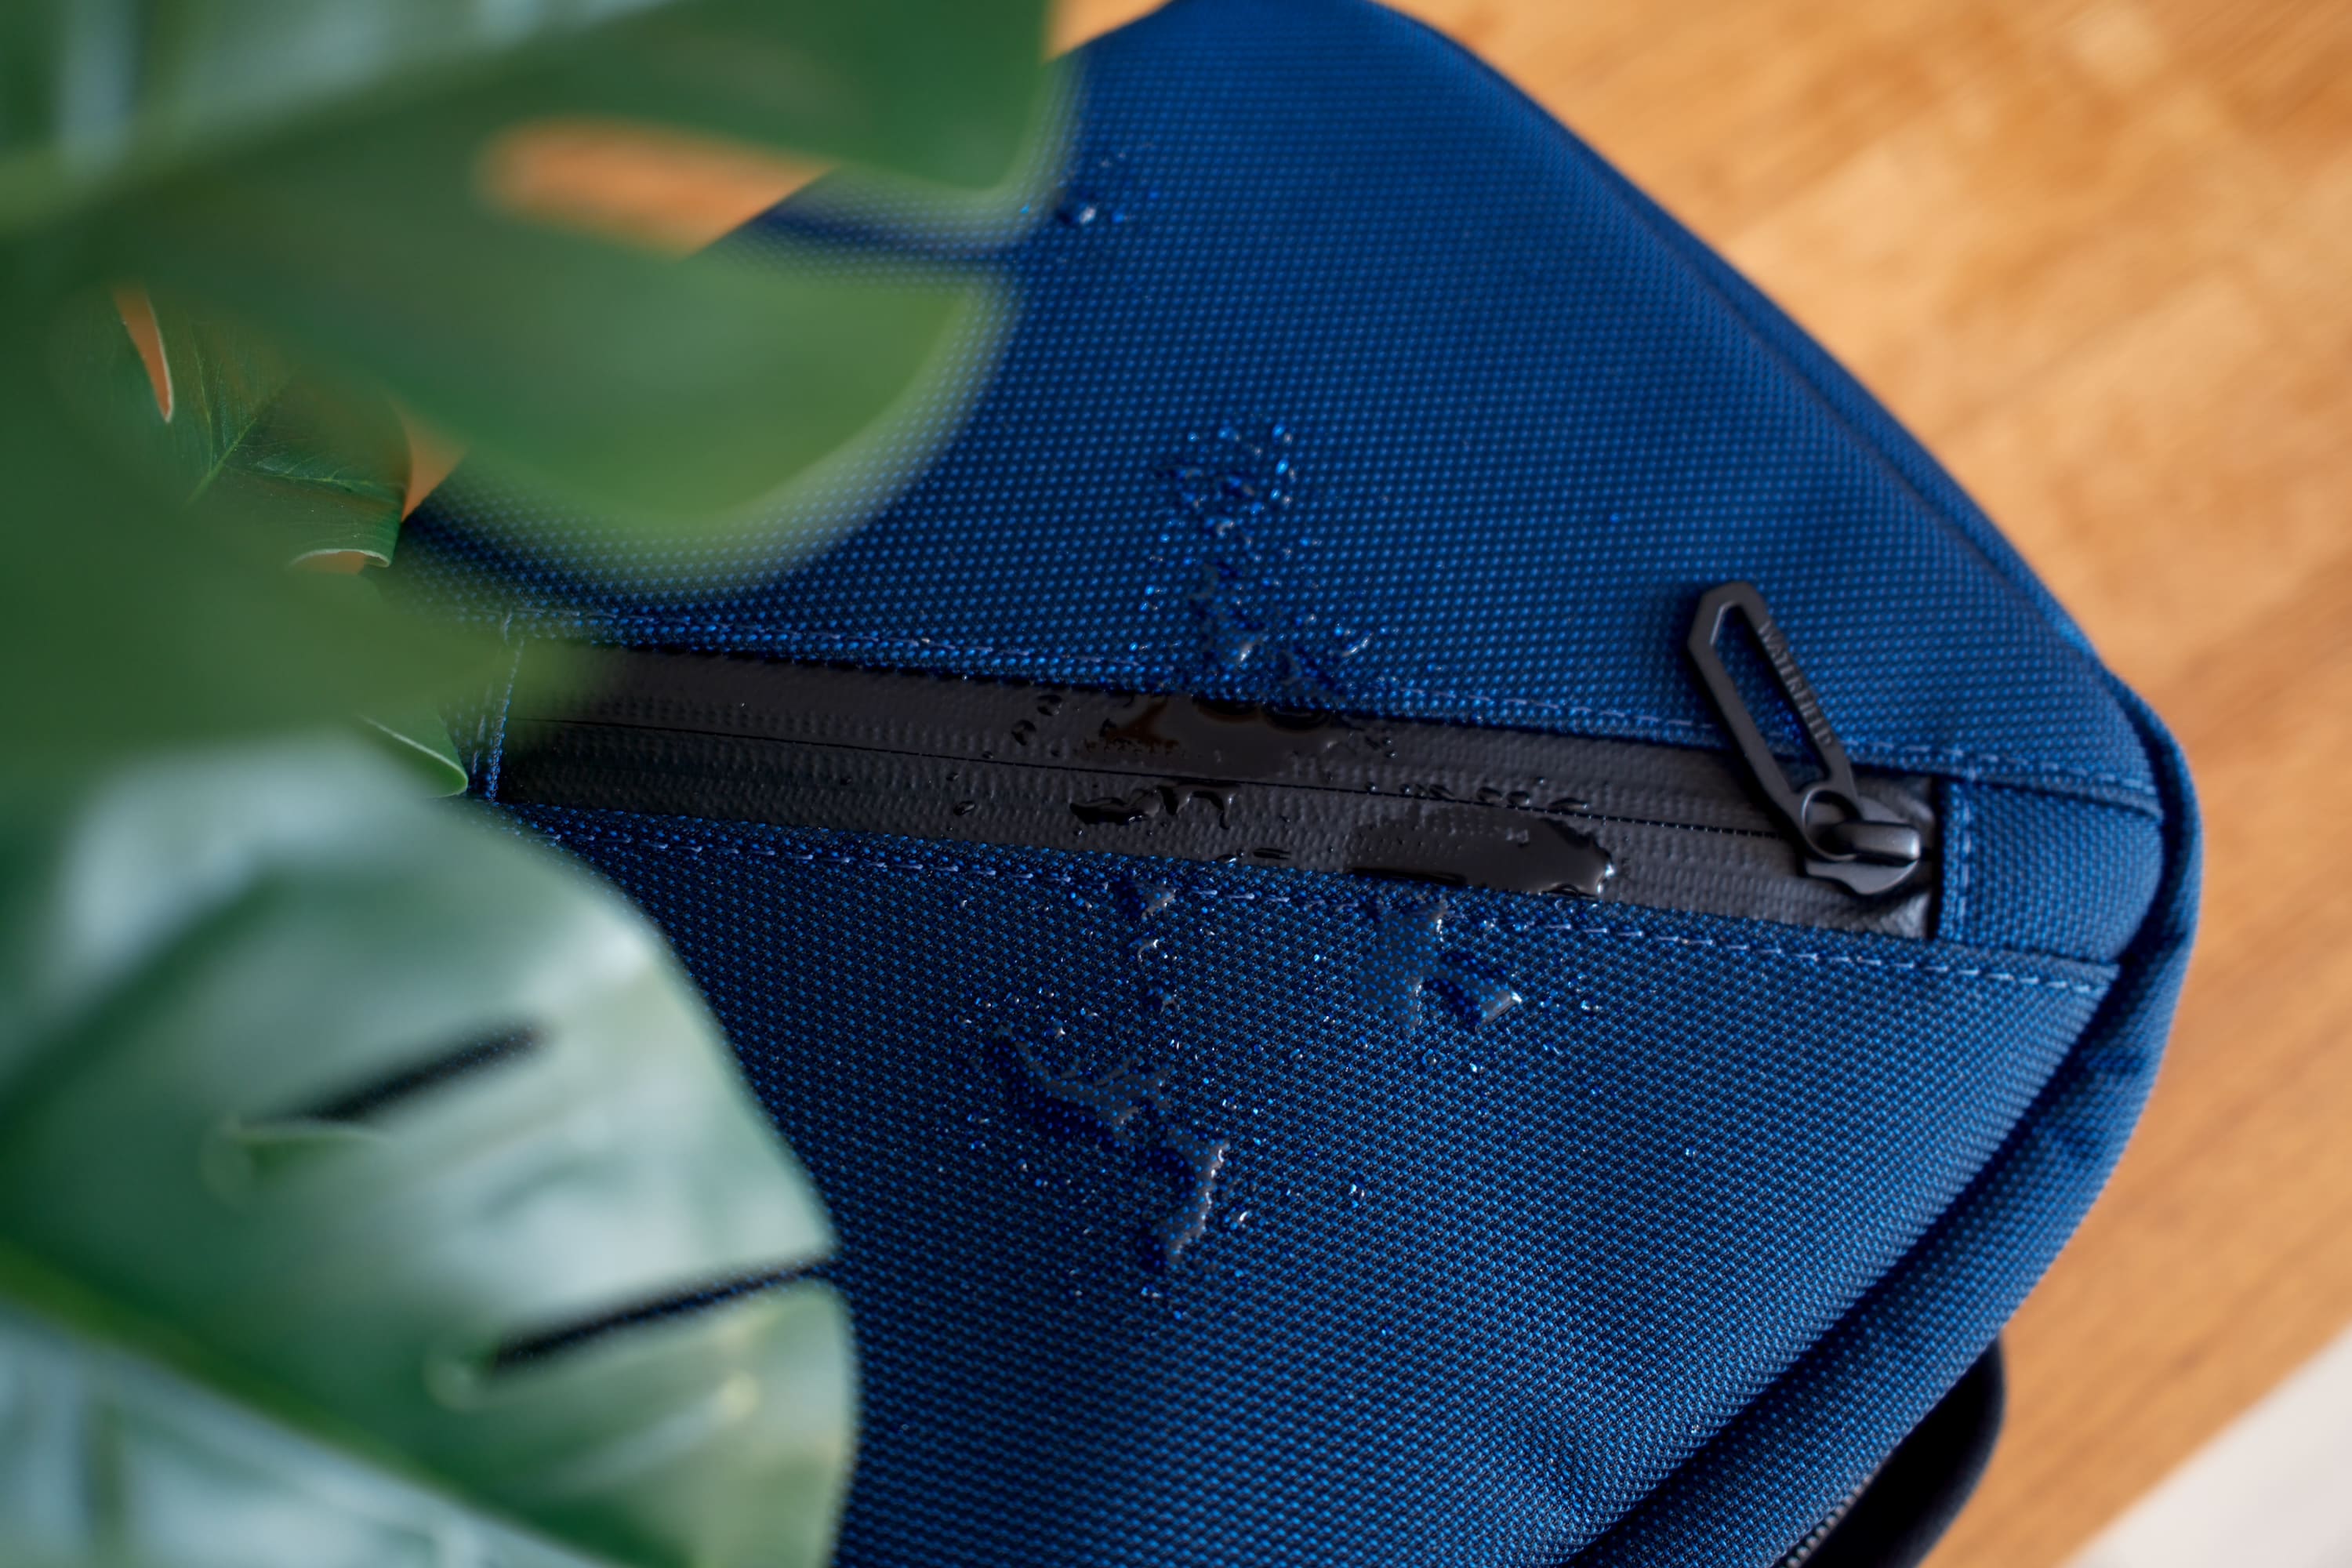 Water droplets beading on top of the case and zipper.